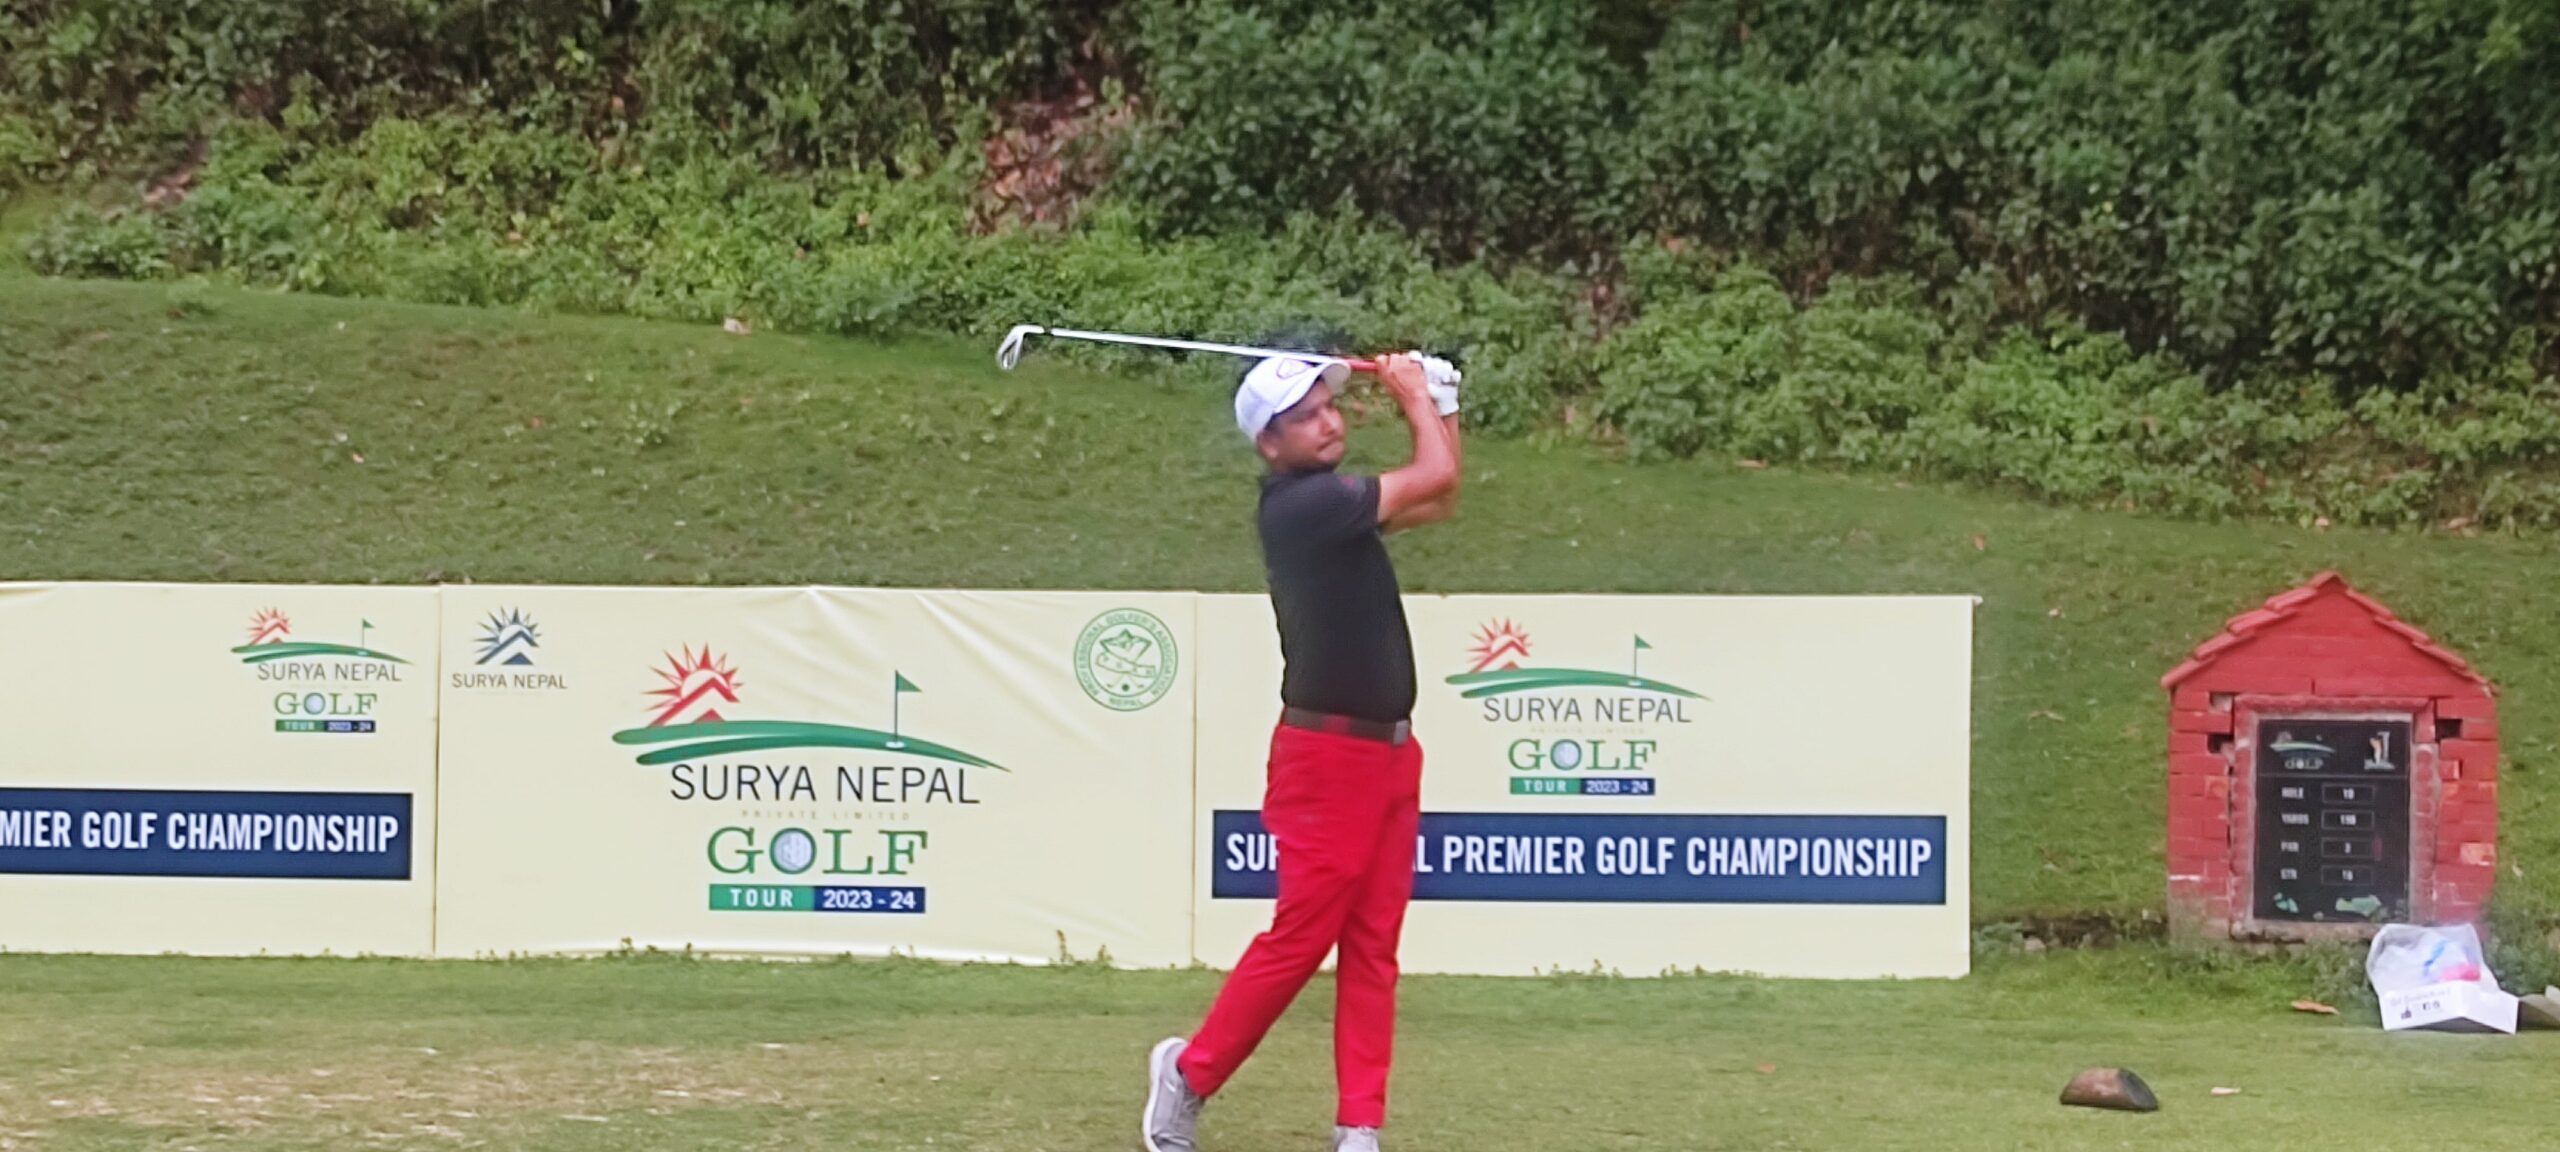 Surya Nepal Golf: Dinesh leads by one stroke over Toran on opening day